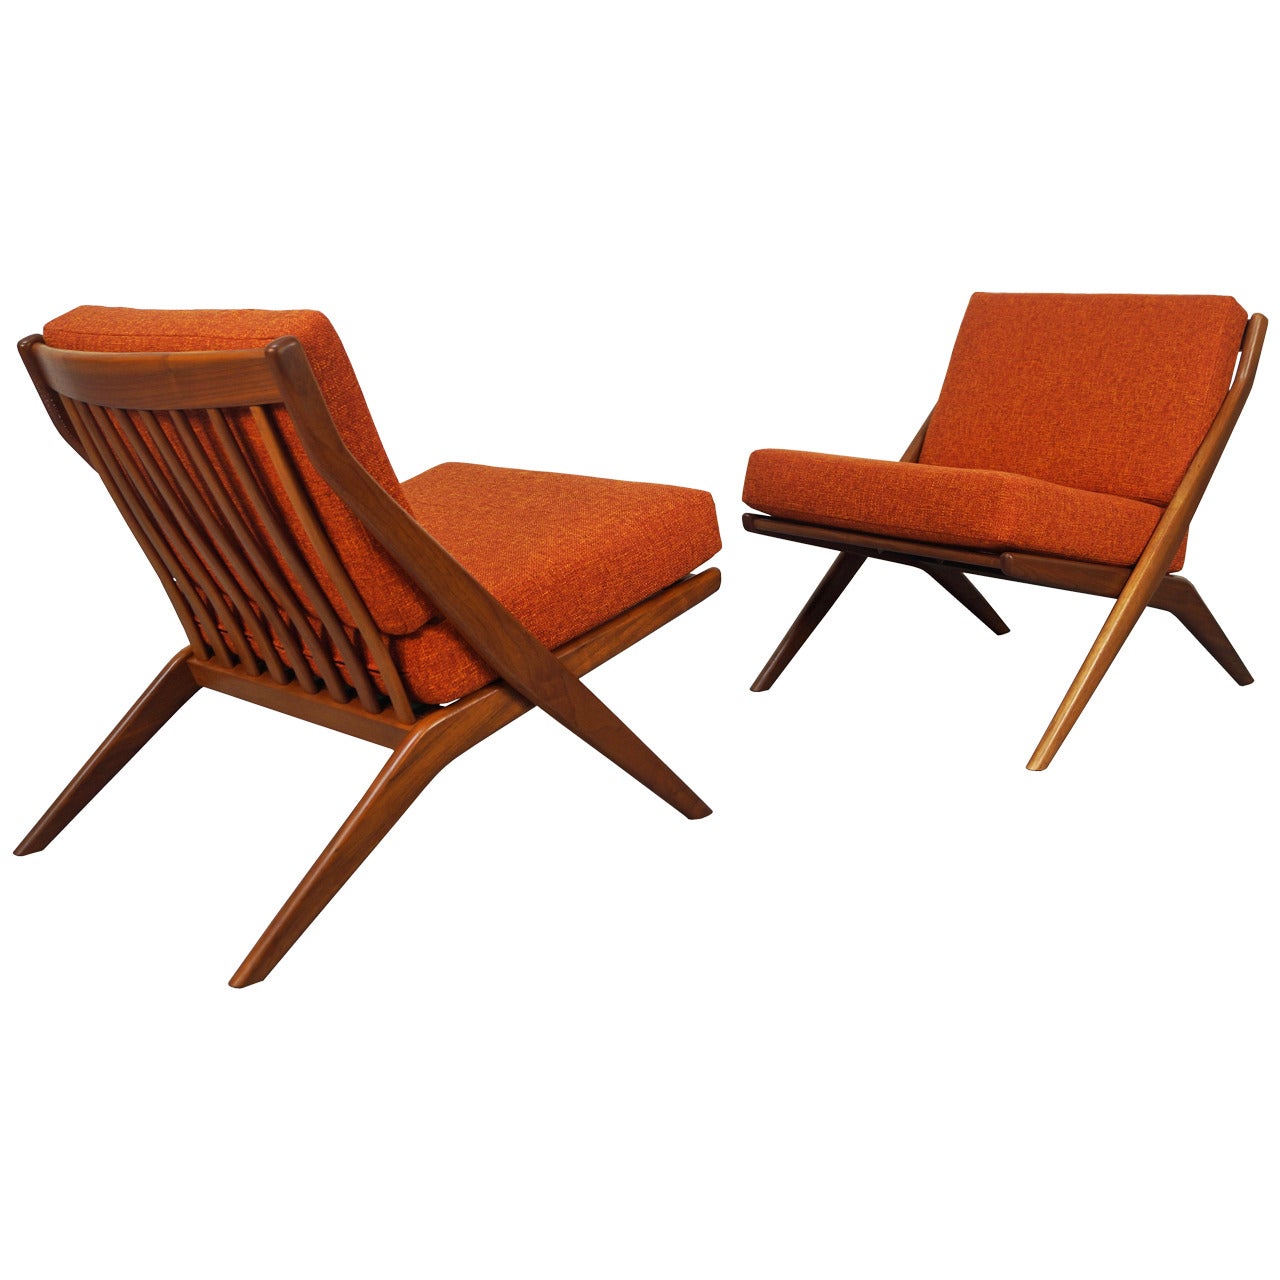 "Scissor" Lounge Chairs by Folke Ohlsson for DUX